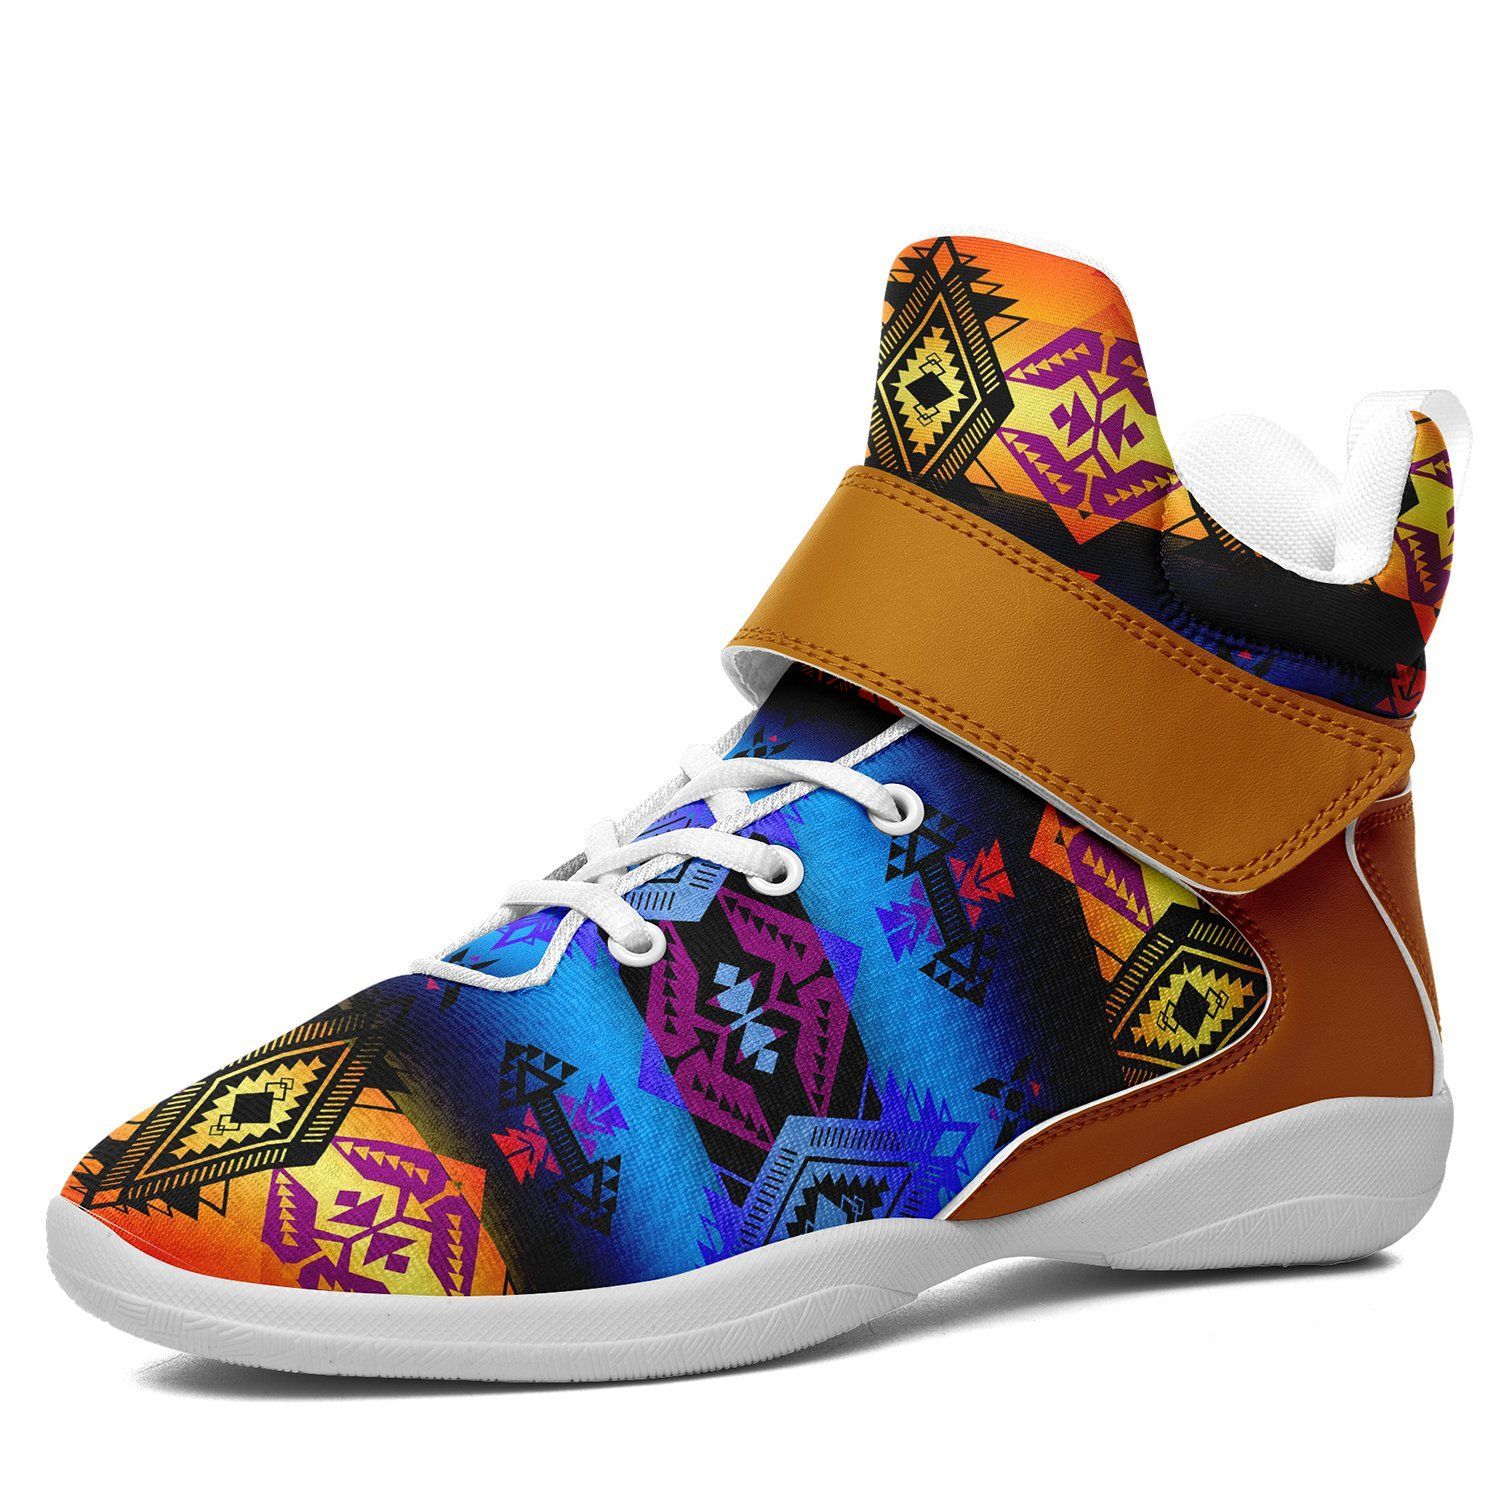 Sovereign Nation Sunset Kid's Ipottaa Basketball / Sport High Top Shoes 49 Dzine US Child 12.5 / EUR 30 White Sole with Brown Strap 